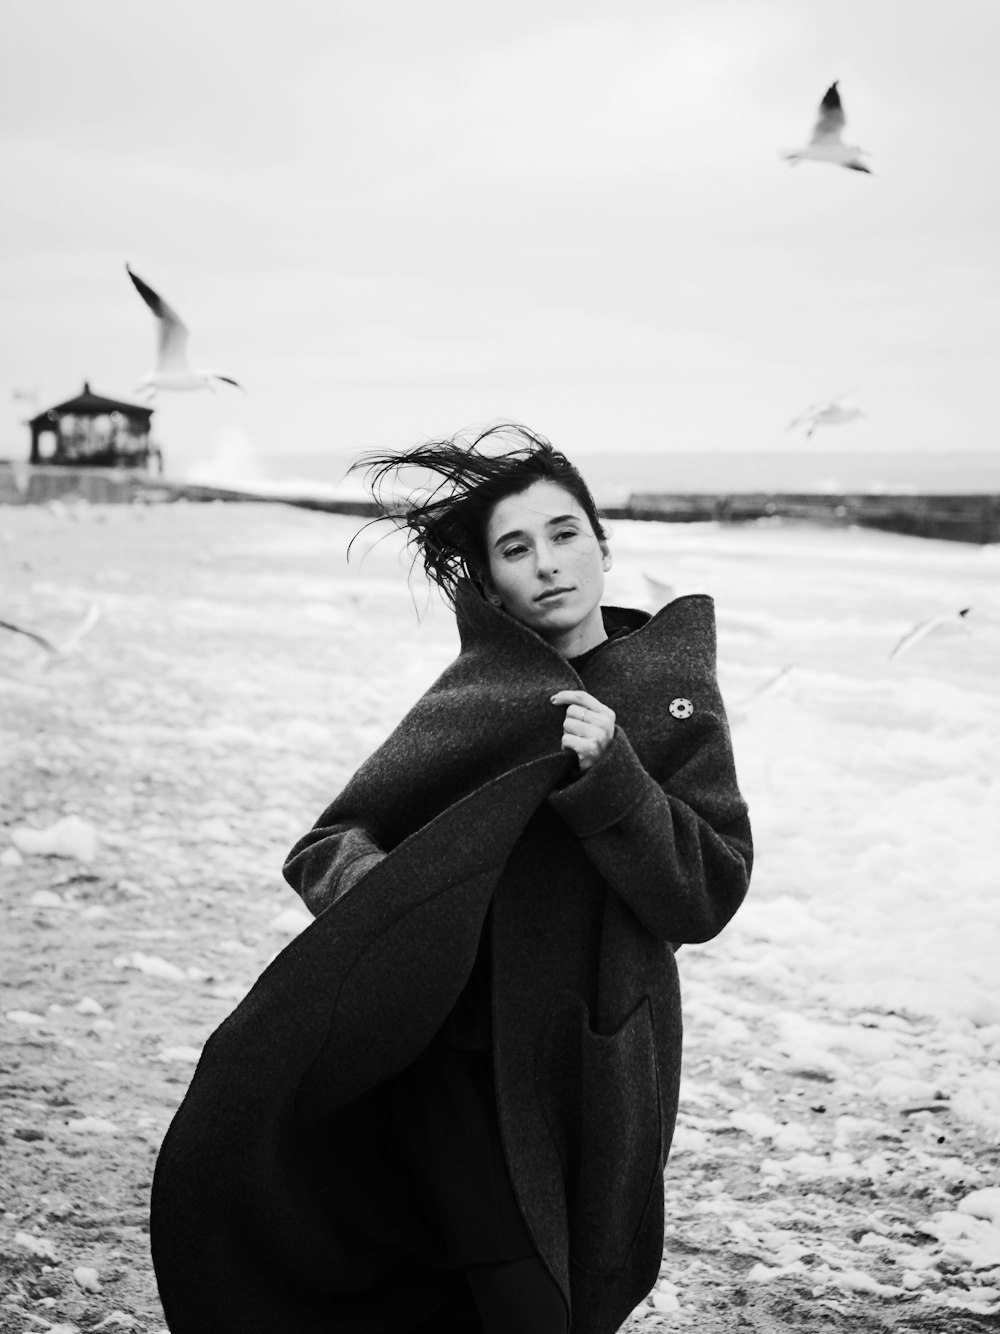 woman in black coat walking with the seagulls flying